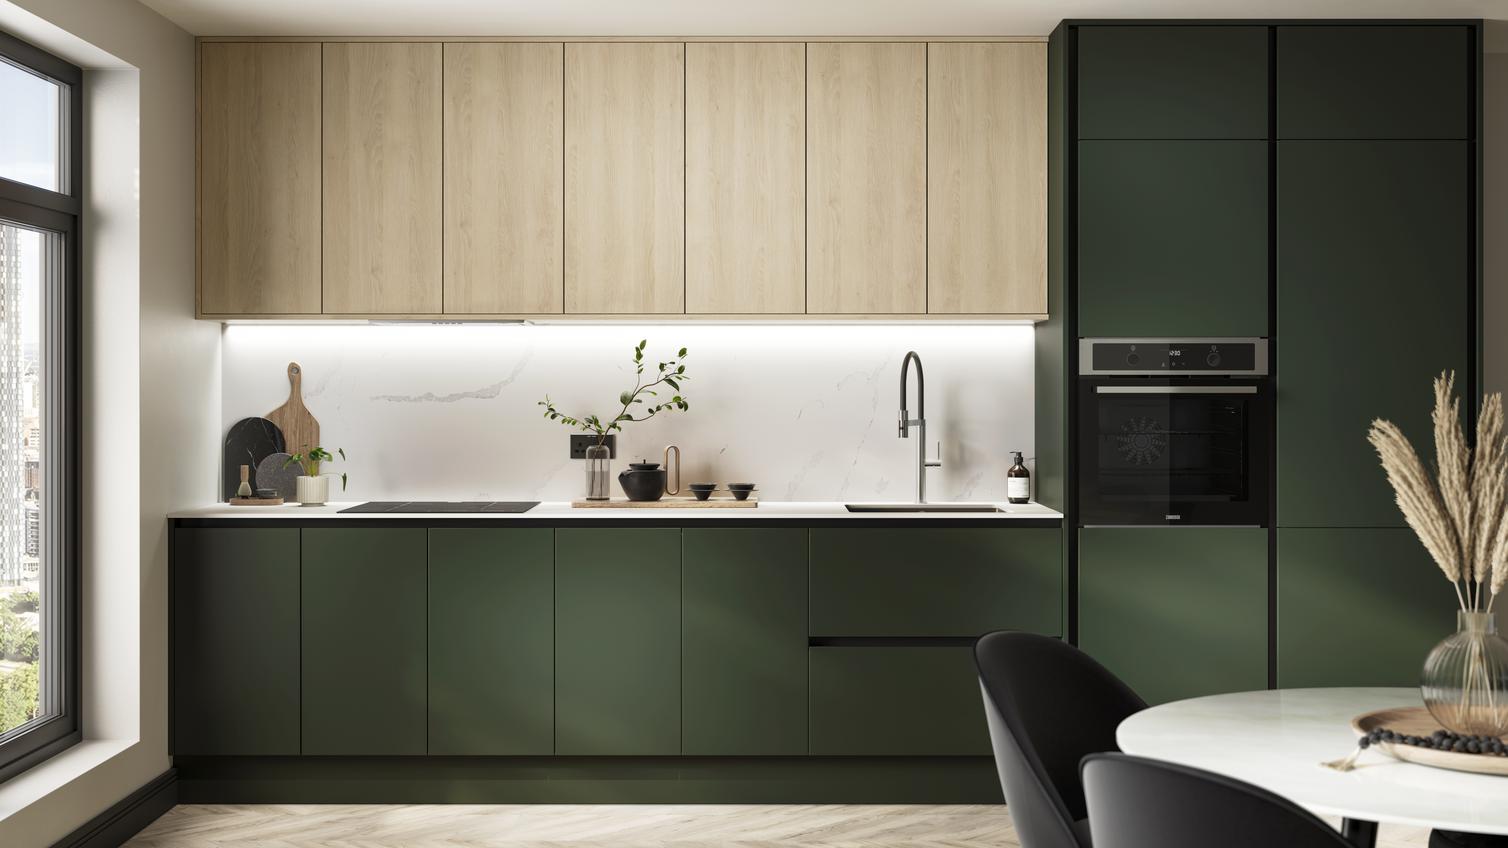 A single-wall kitchen with green cabinets. Includes a white worktop, induction hob, and oak wall cabinets.